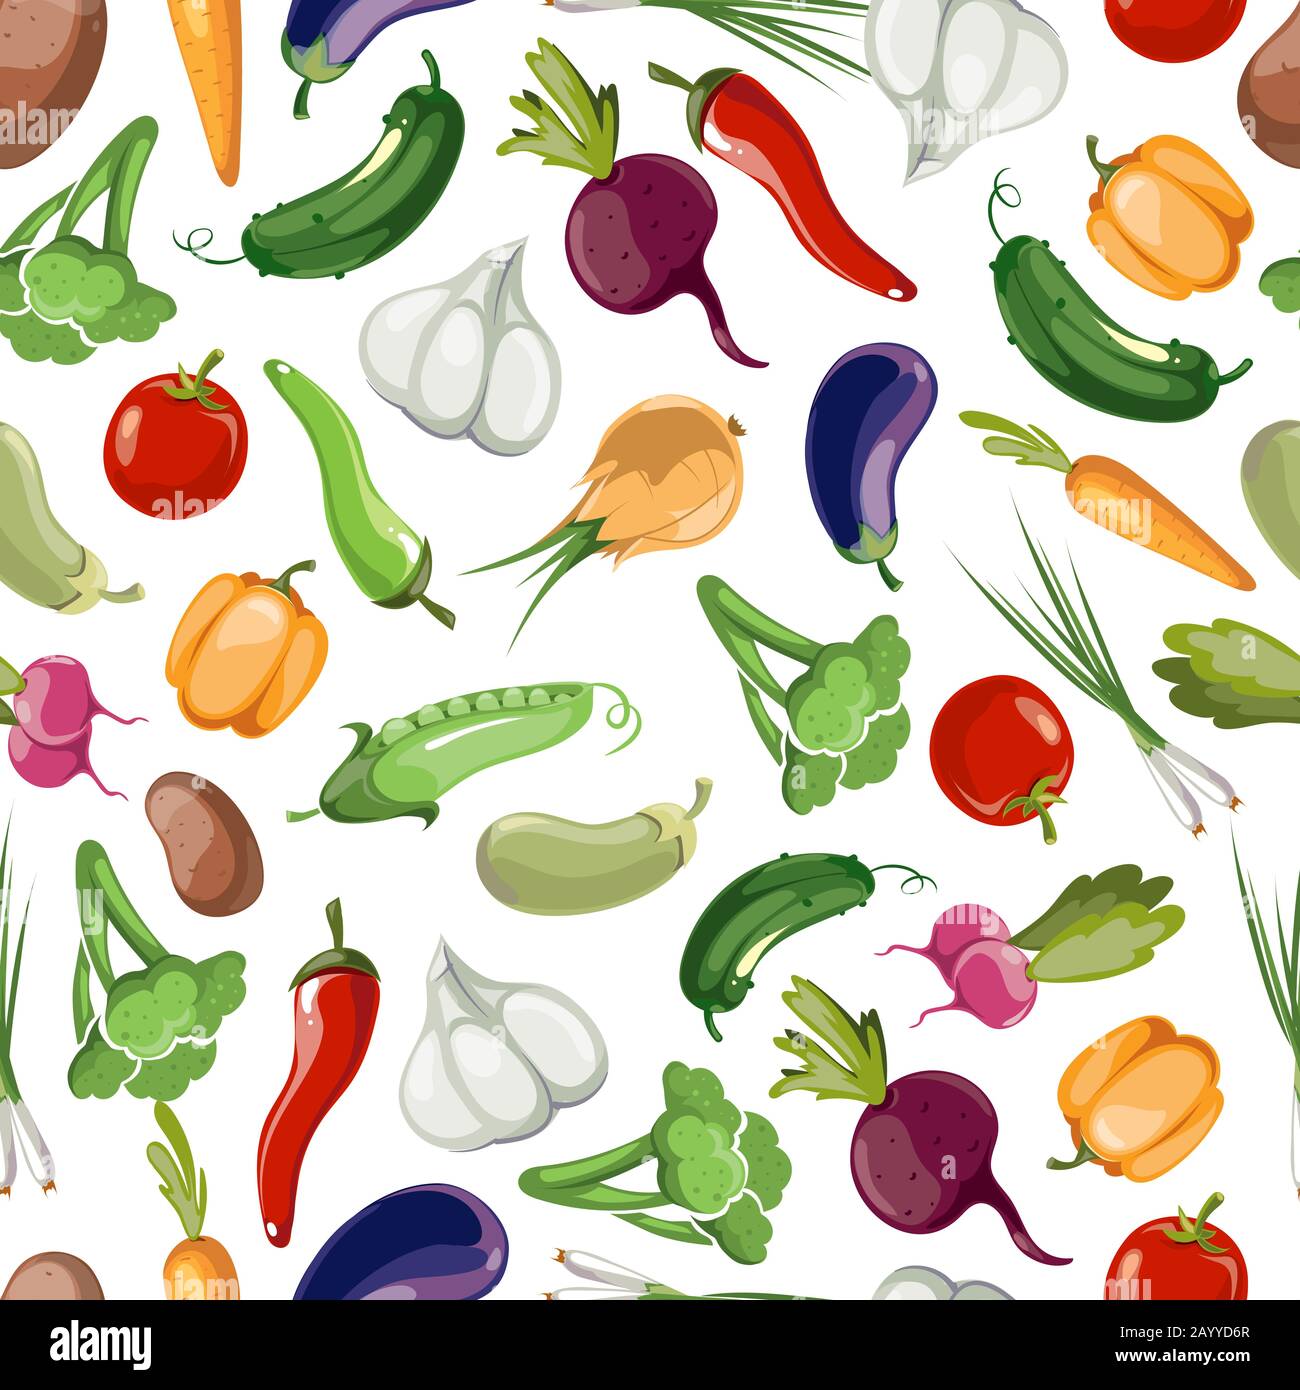 Seamless vector pattern background of vegetables. Vegetable illustration food and design drawing vegetable for healthy Stock Vector